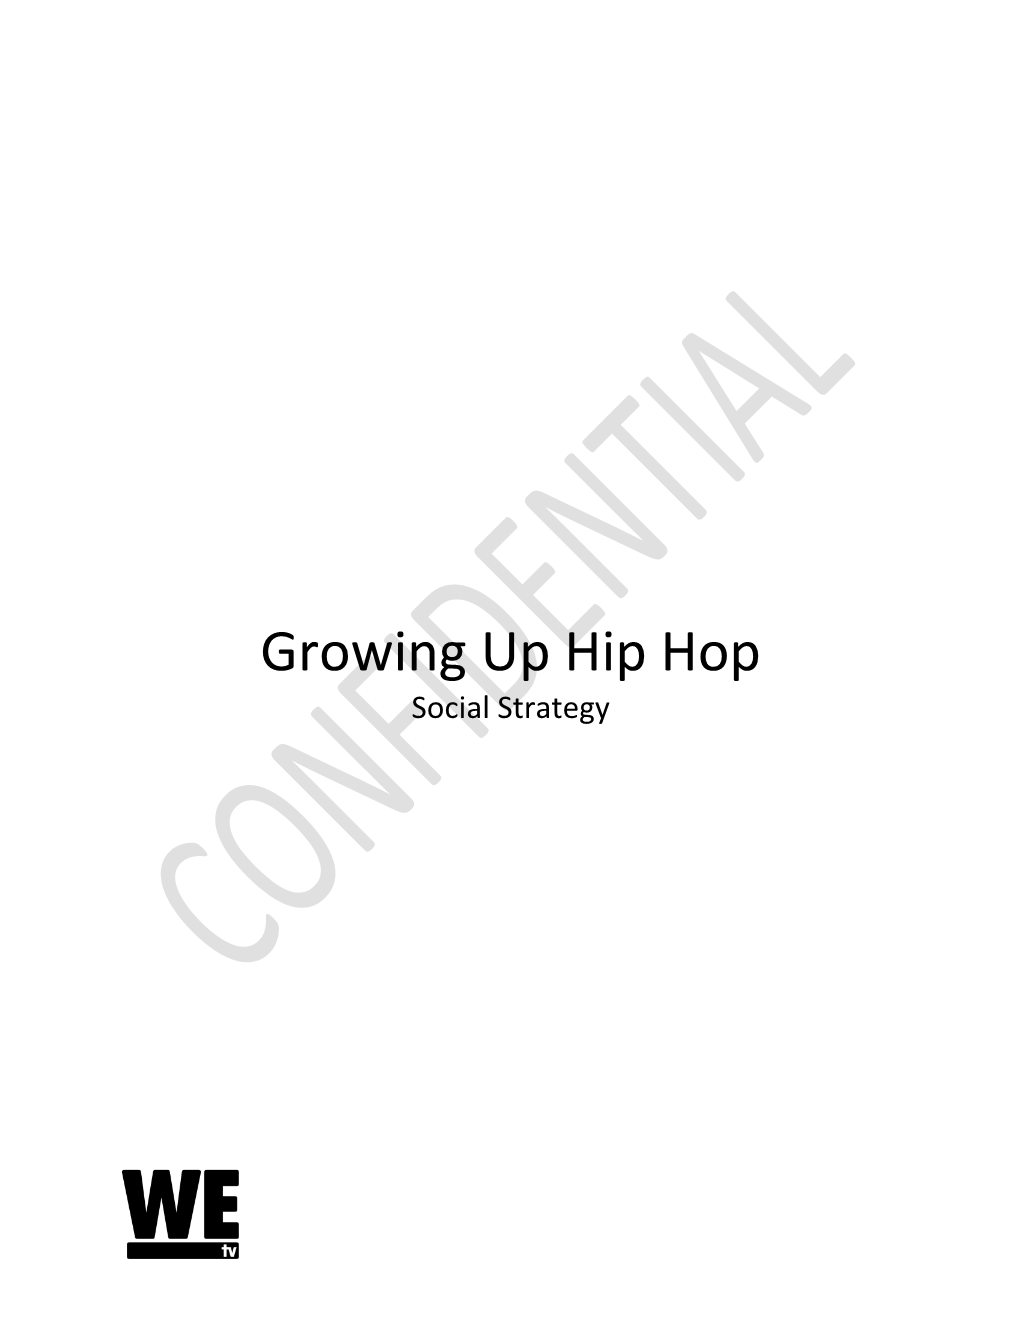 Growing up Hip Hop Social Strategy